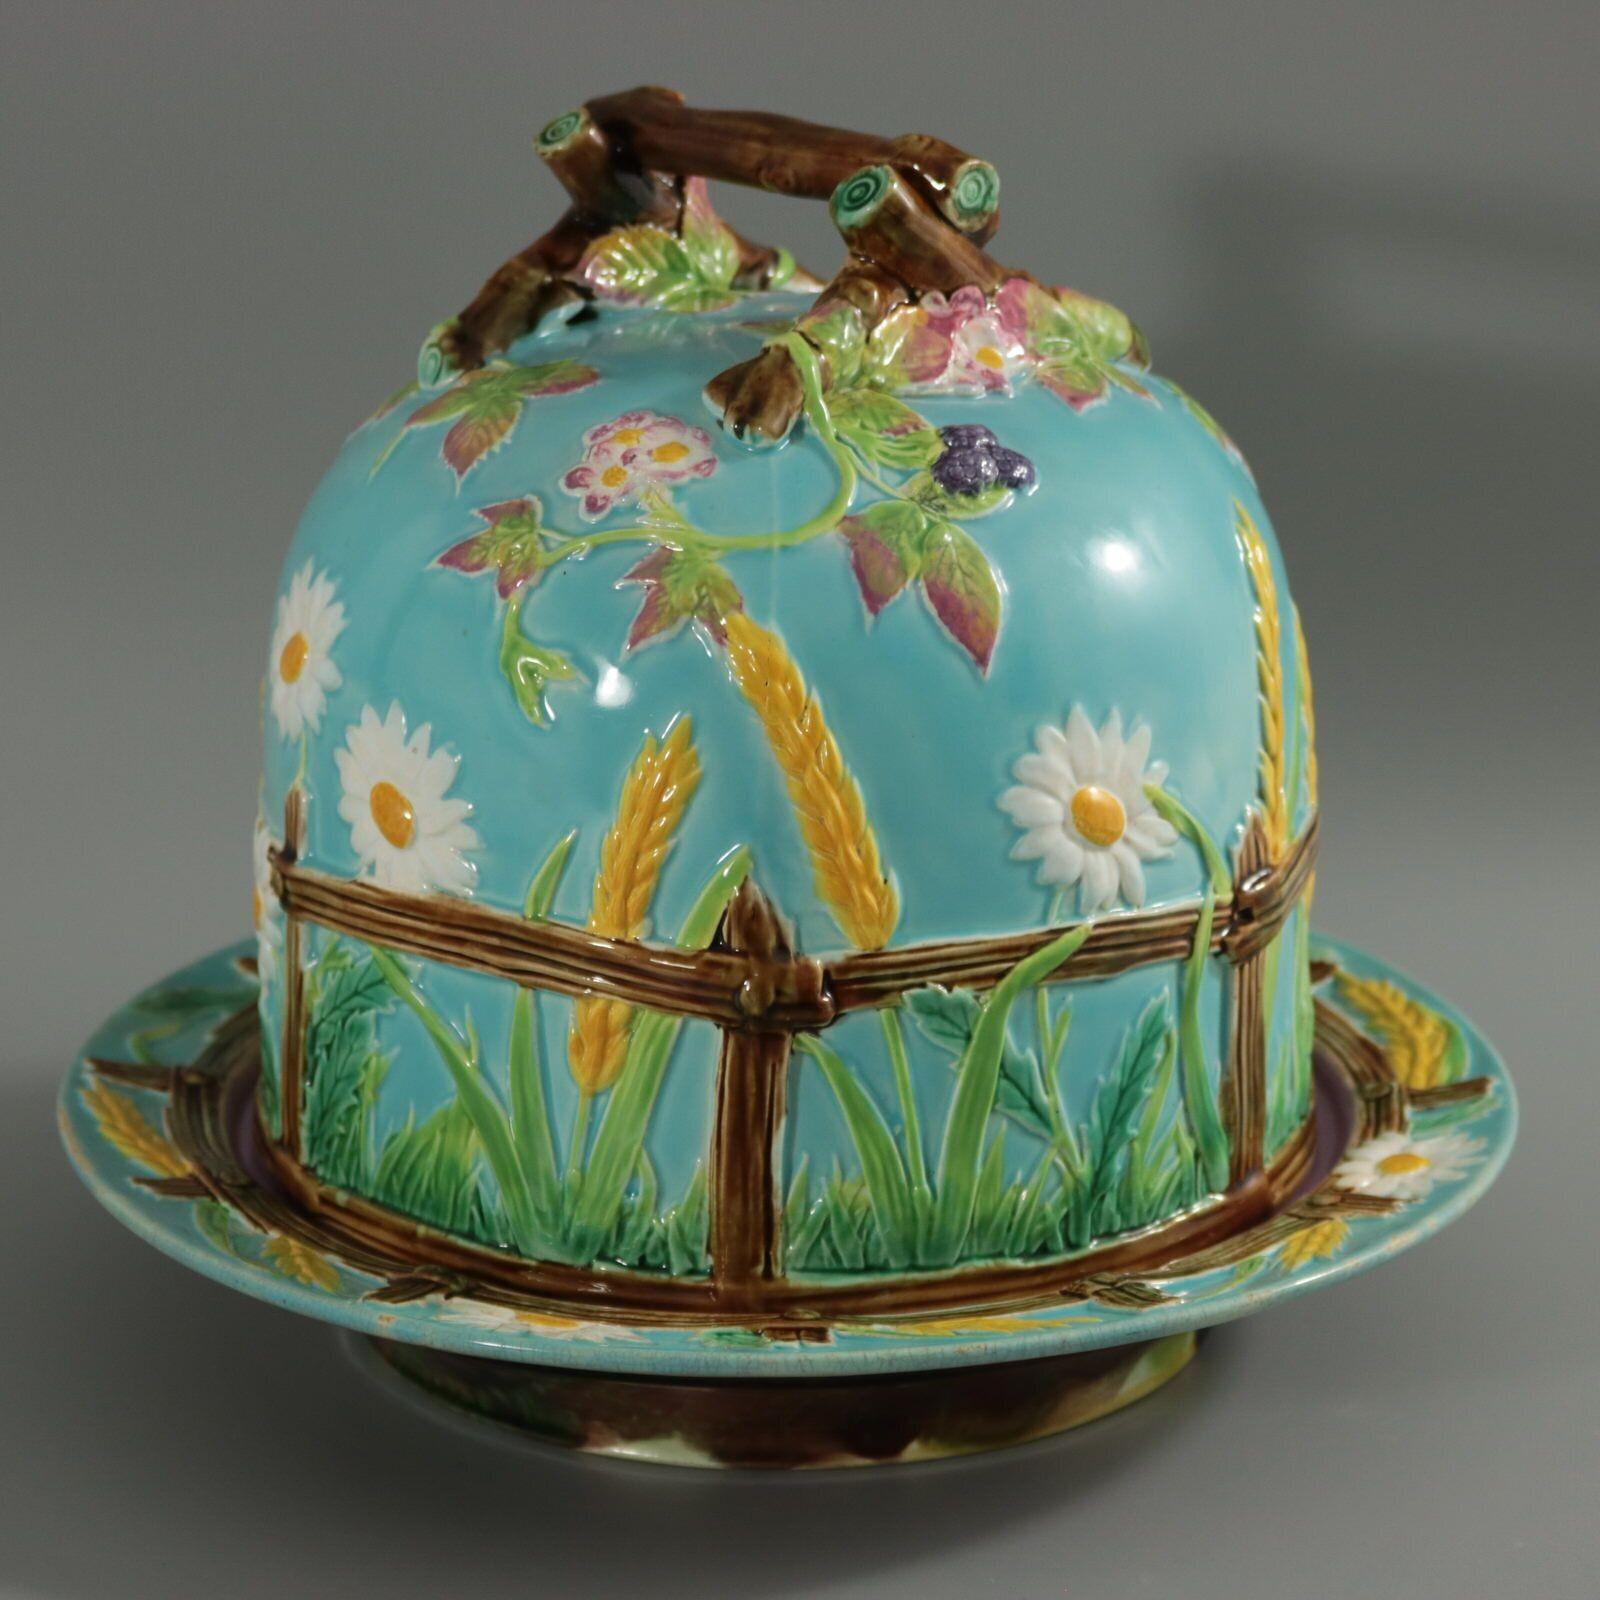 https://a.1stdibscdn.com/george-jones-majolica-daisy-cheese-keeper-for-sale-picture-2/f_42461/f_284124821651051404108/2_majolica_20123_001_master.jpeg